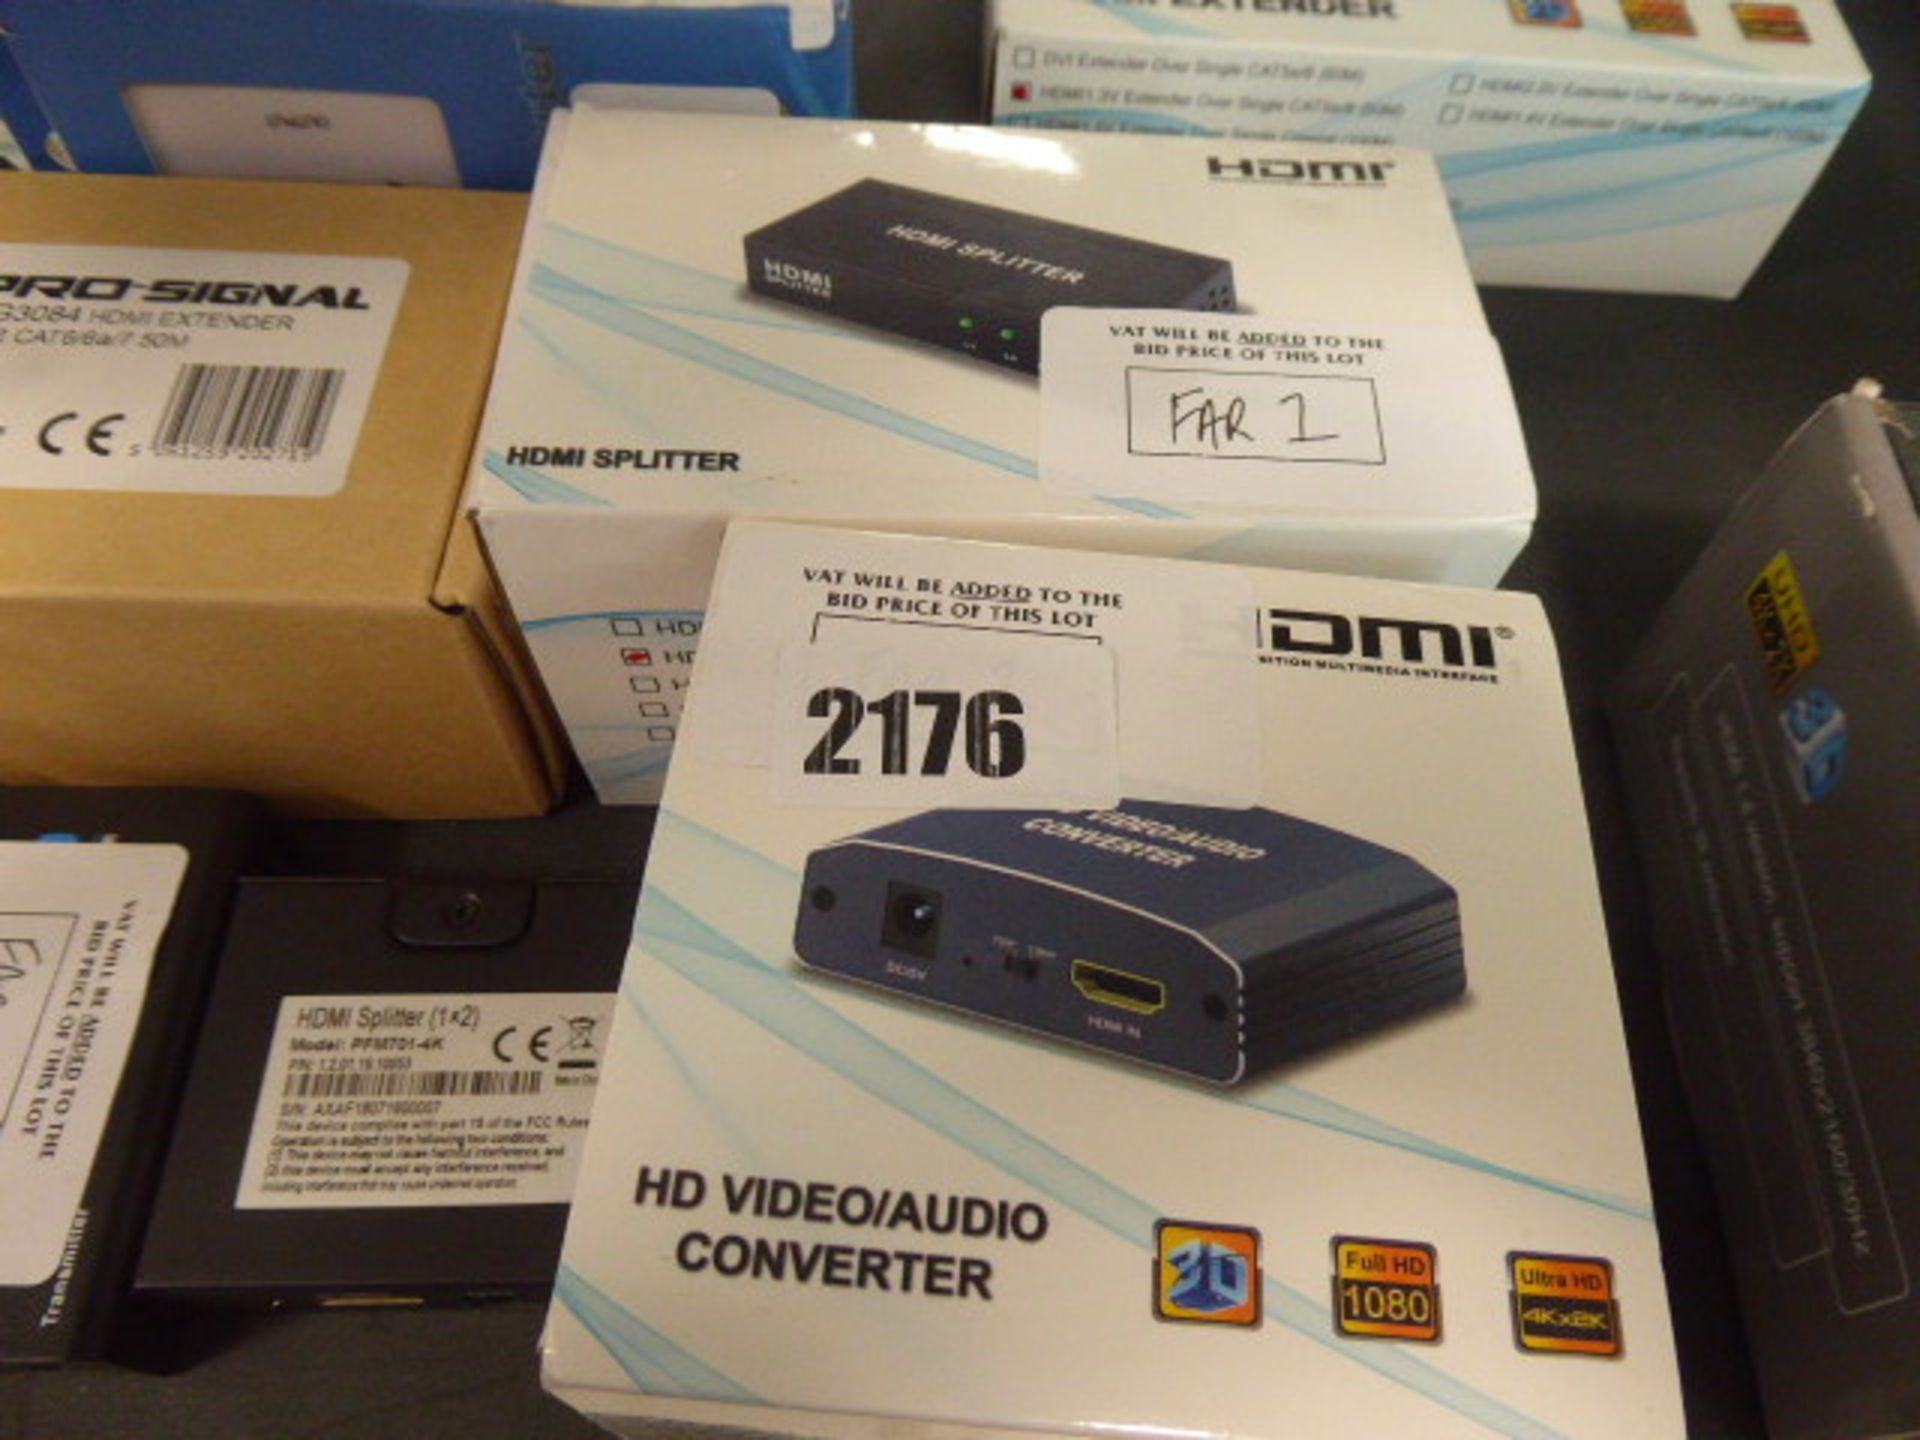 HDMI audio video converters, range extenders, mini HDMI splitter and other loose accessories - Image 3 of 3